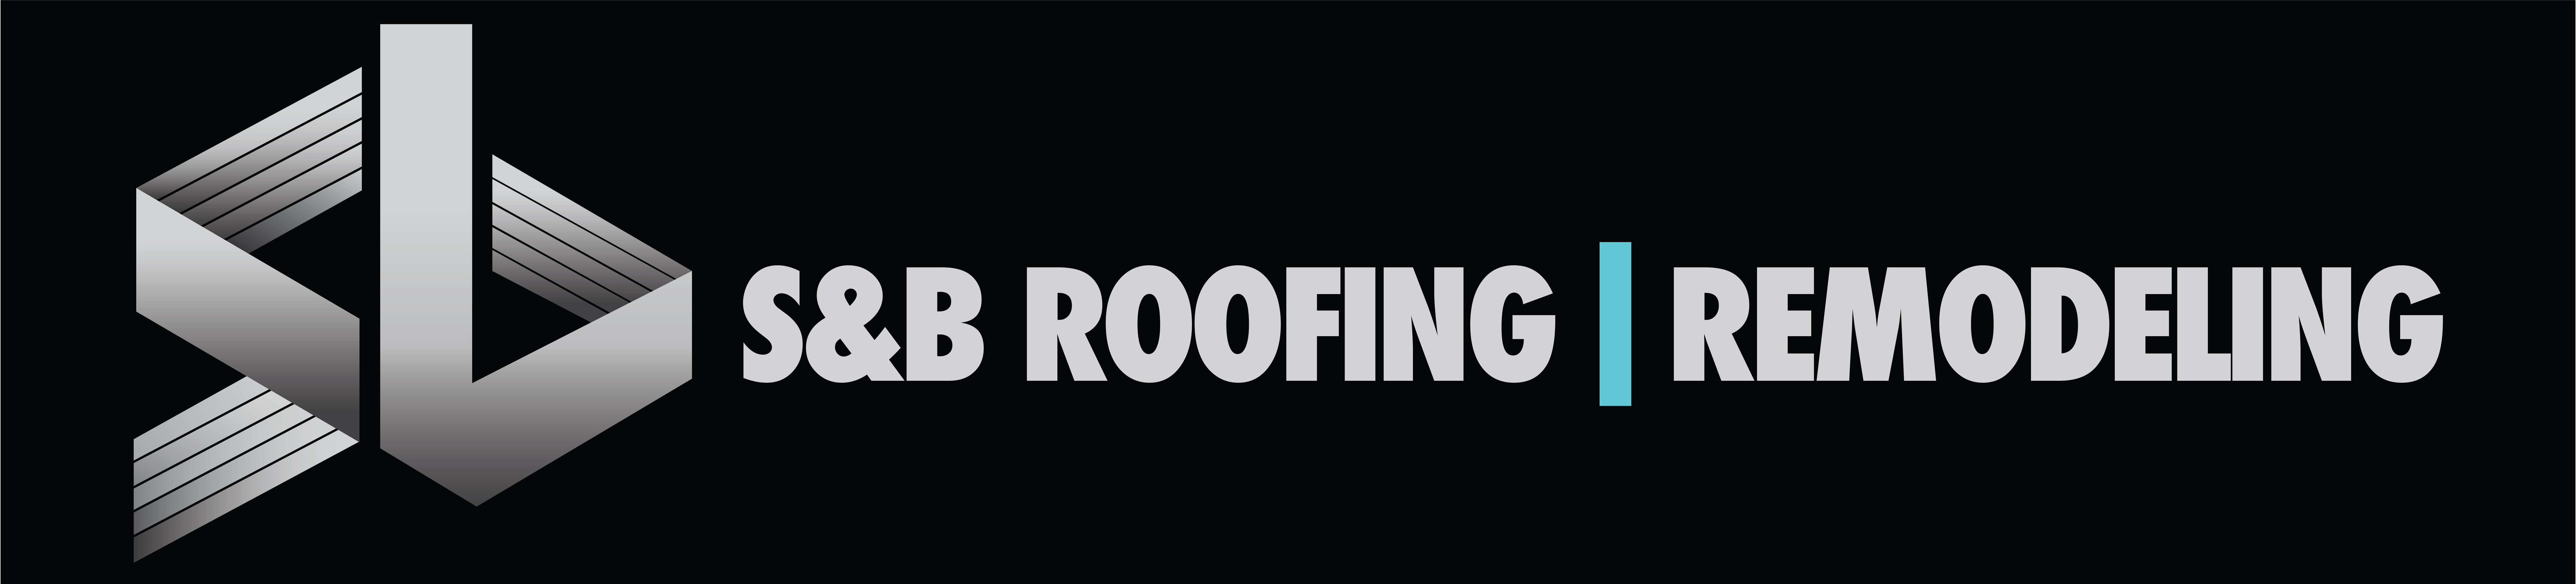 S & B ROOFING